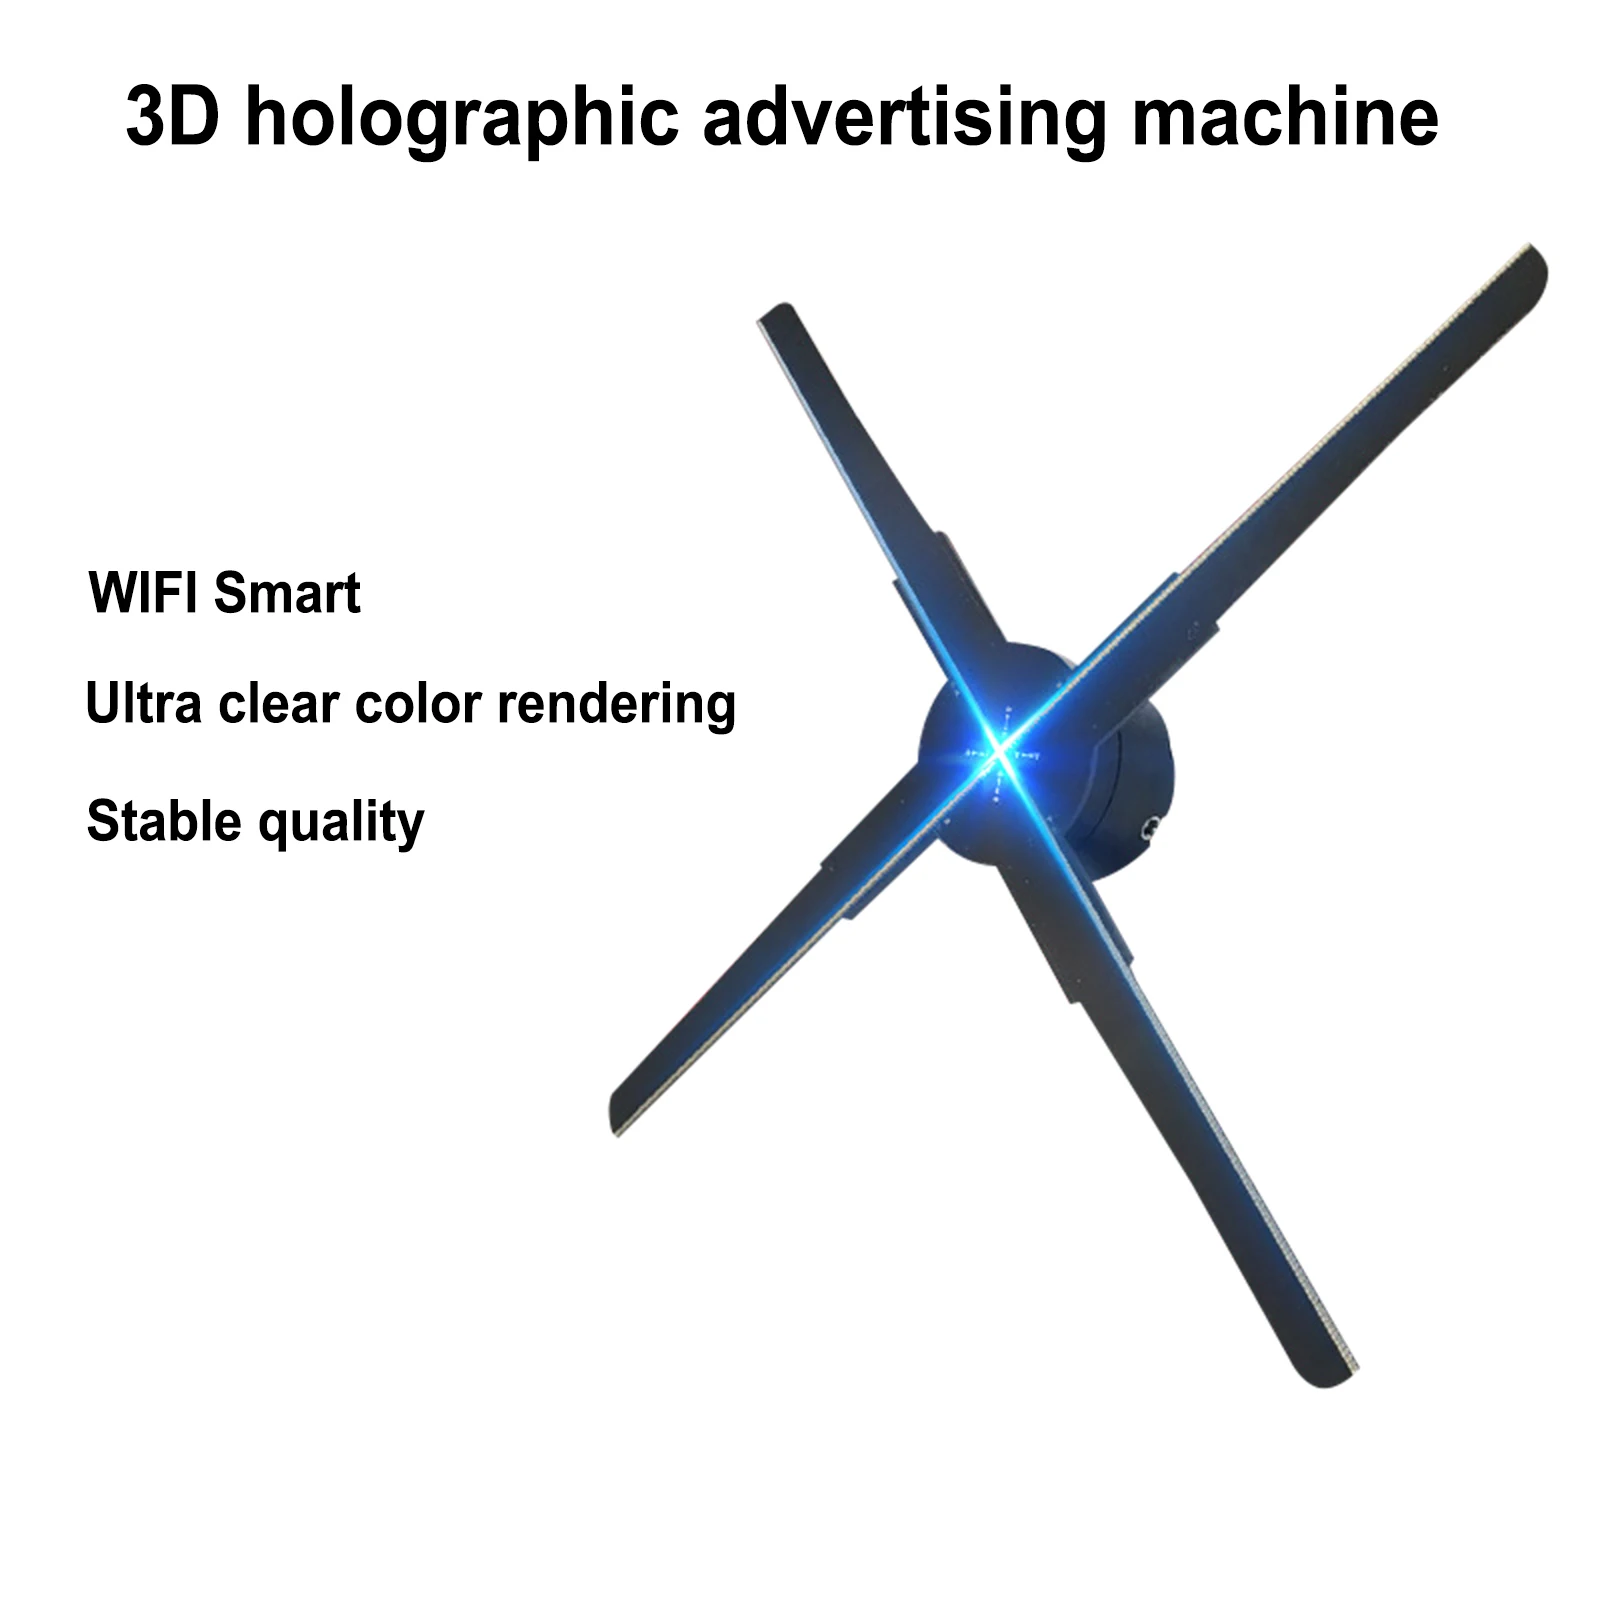 

45cm 3D Fan Hologram Projector Wifi Holographic Lamp Player Remote HD Image Video Advertising Display Projector Light